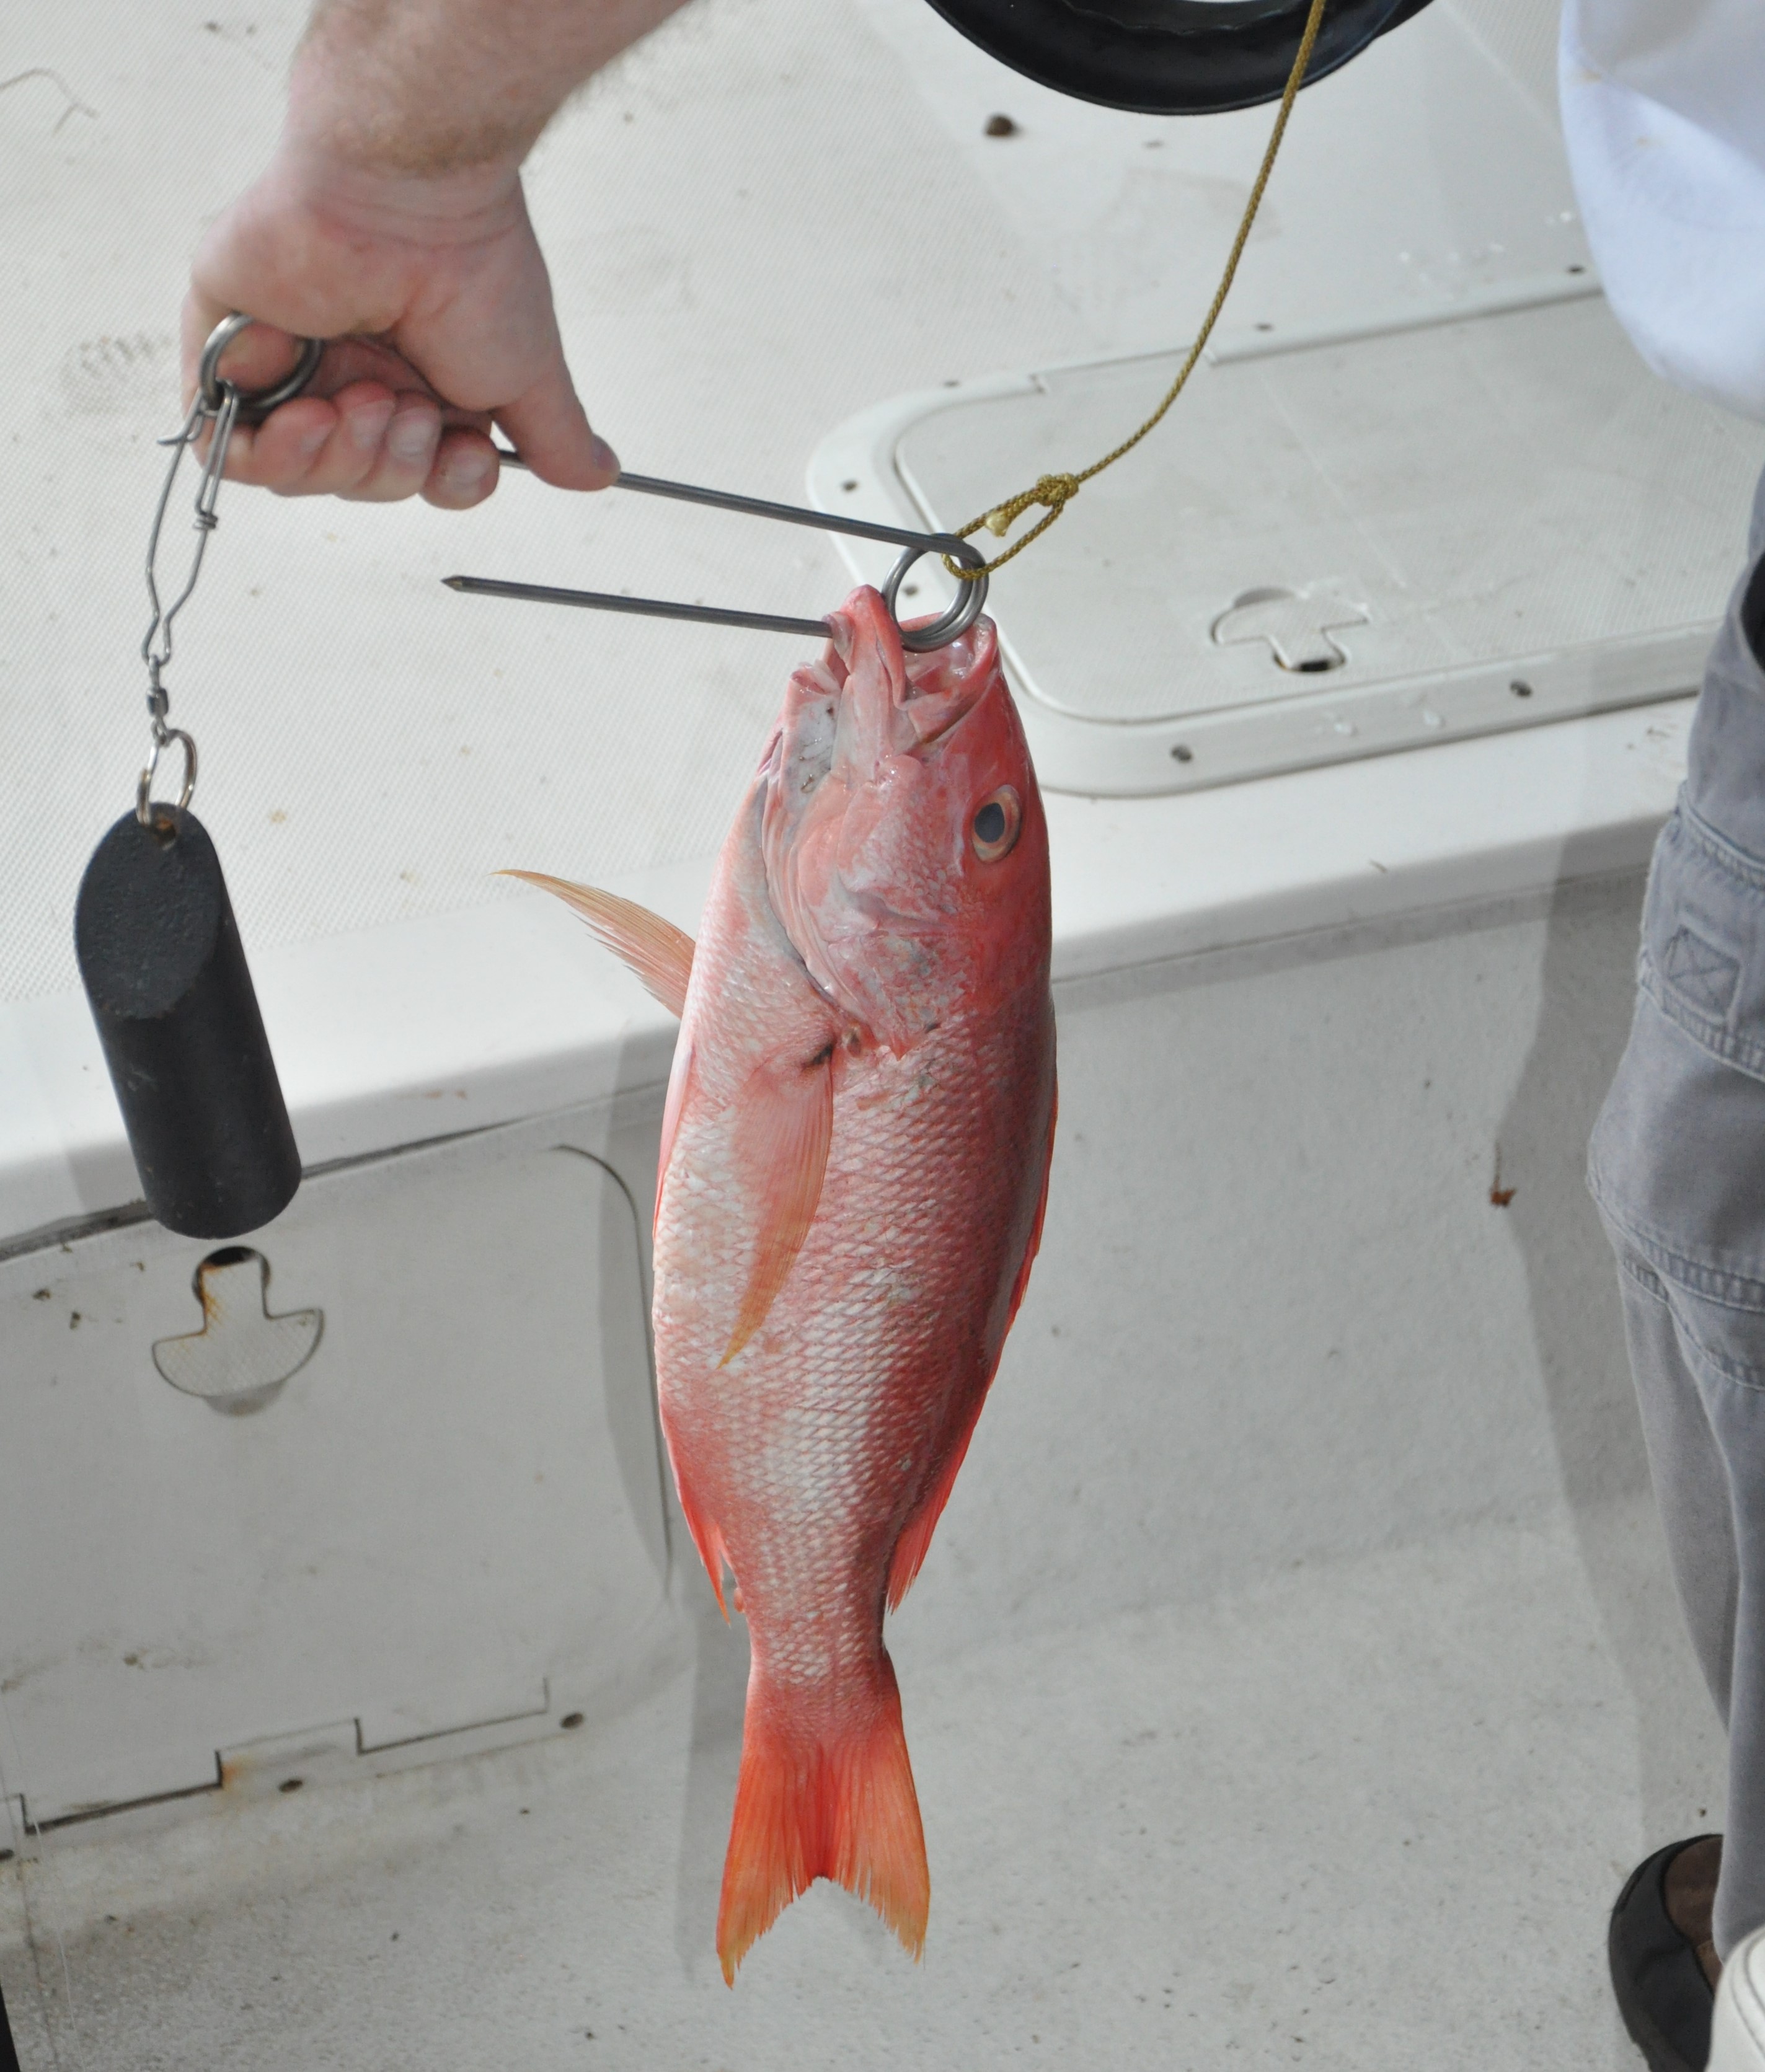 Inverted hook. Photo courtesy of Florida Fish and Wildlife Conservation Commission.